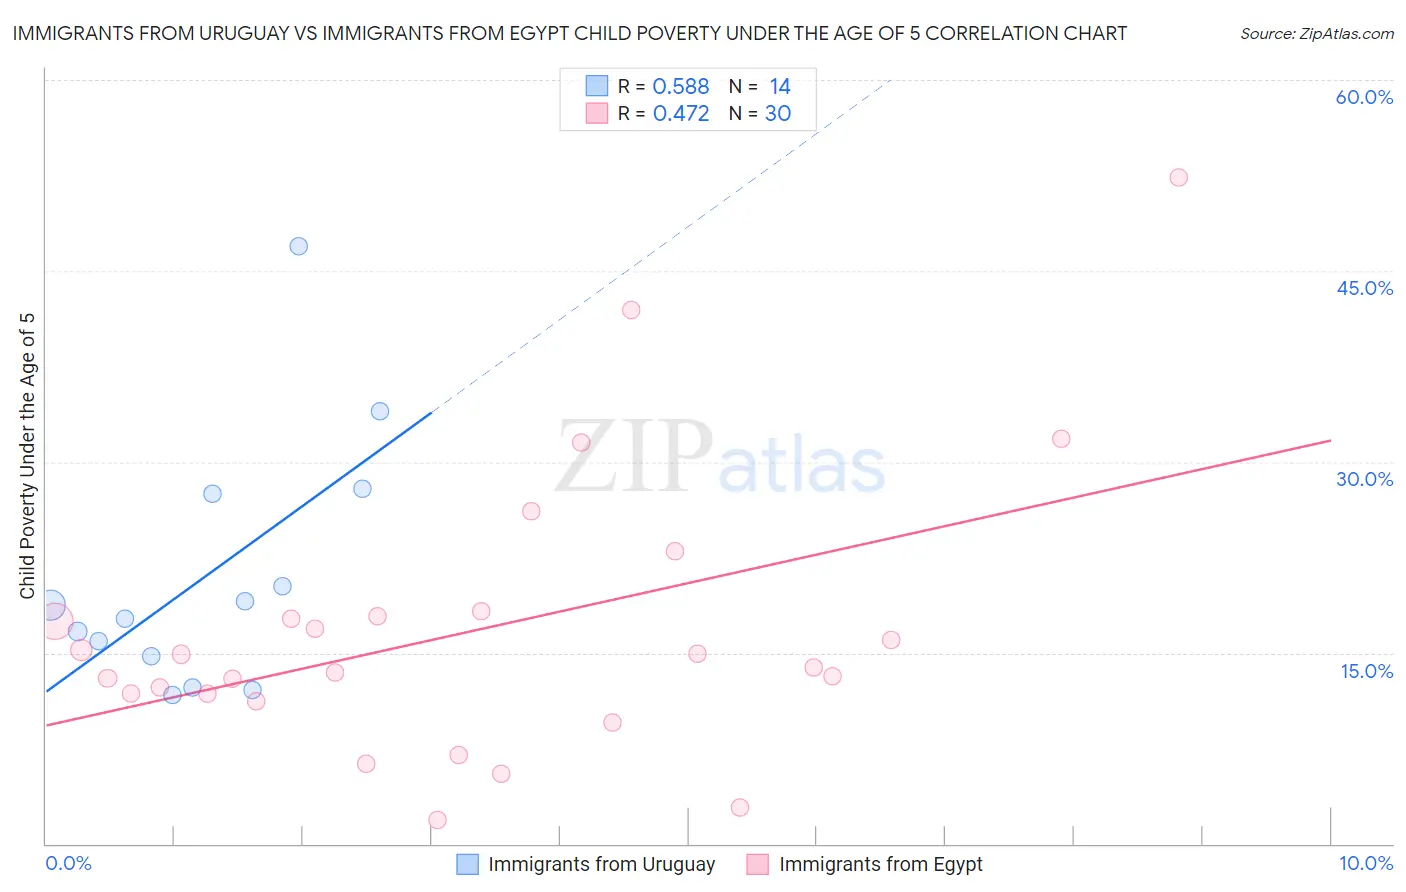 Immigrants from Uruguay vs Immigrants from Egypt Child Poverty Under the Age of 5